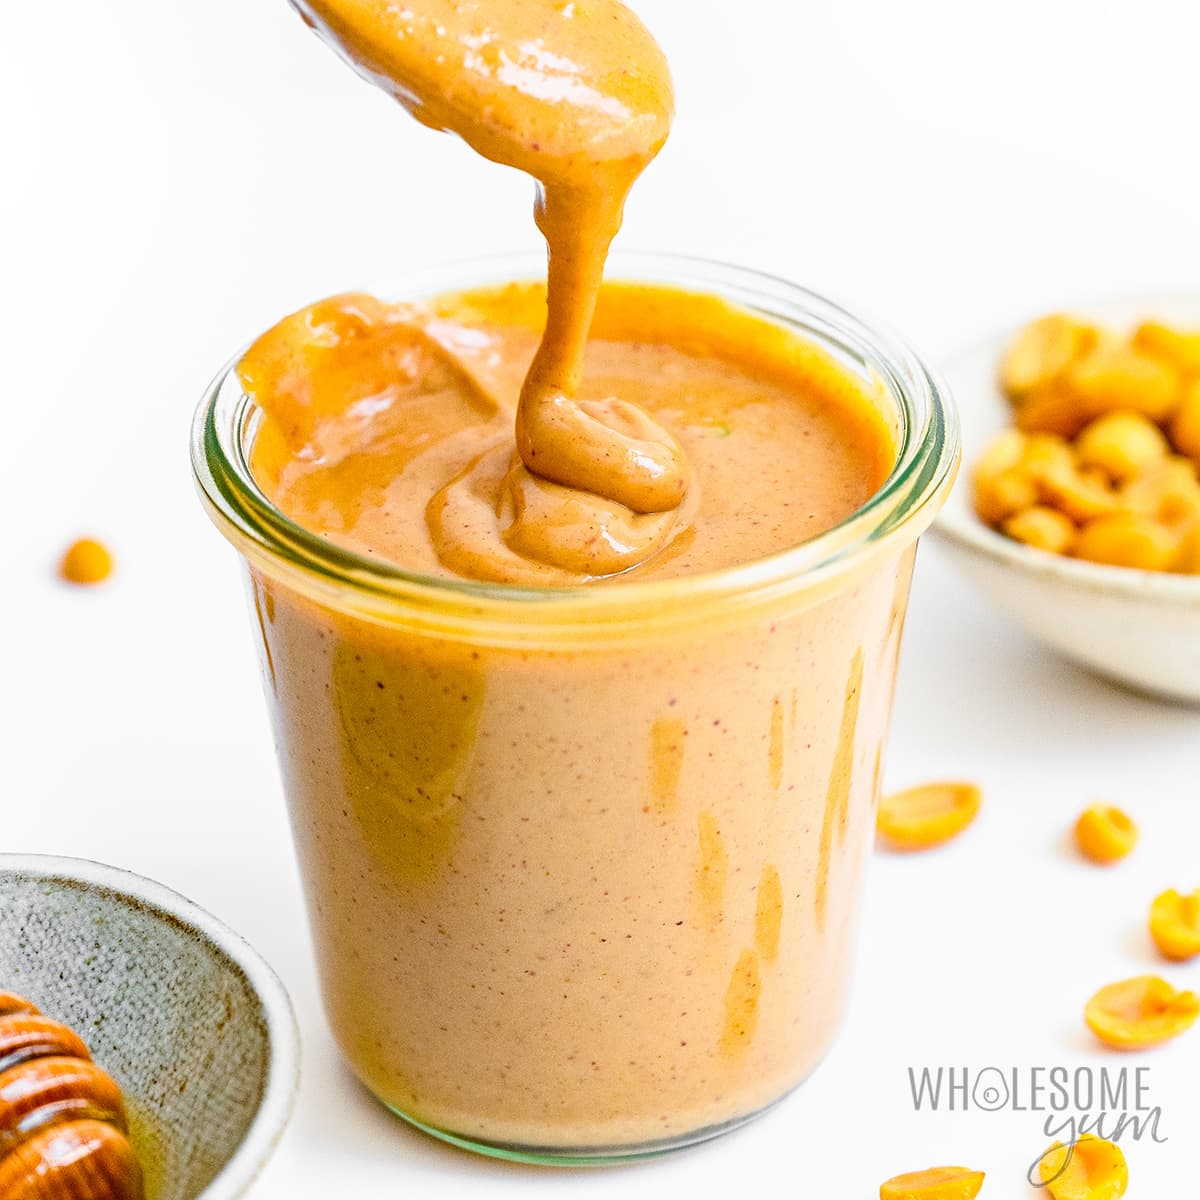 Peanut sauce recipe drizzled from spoon.